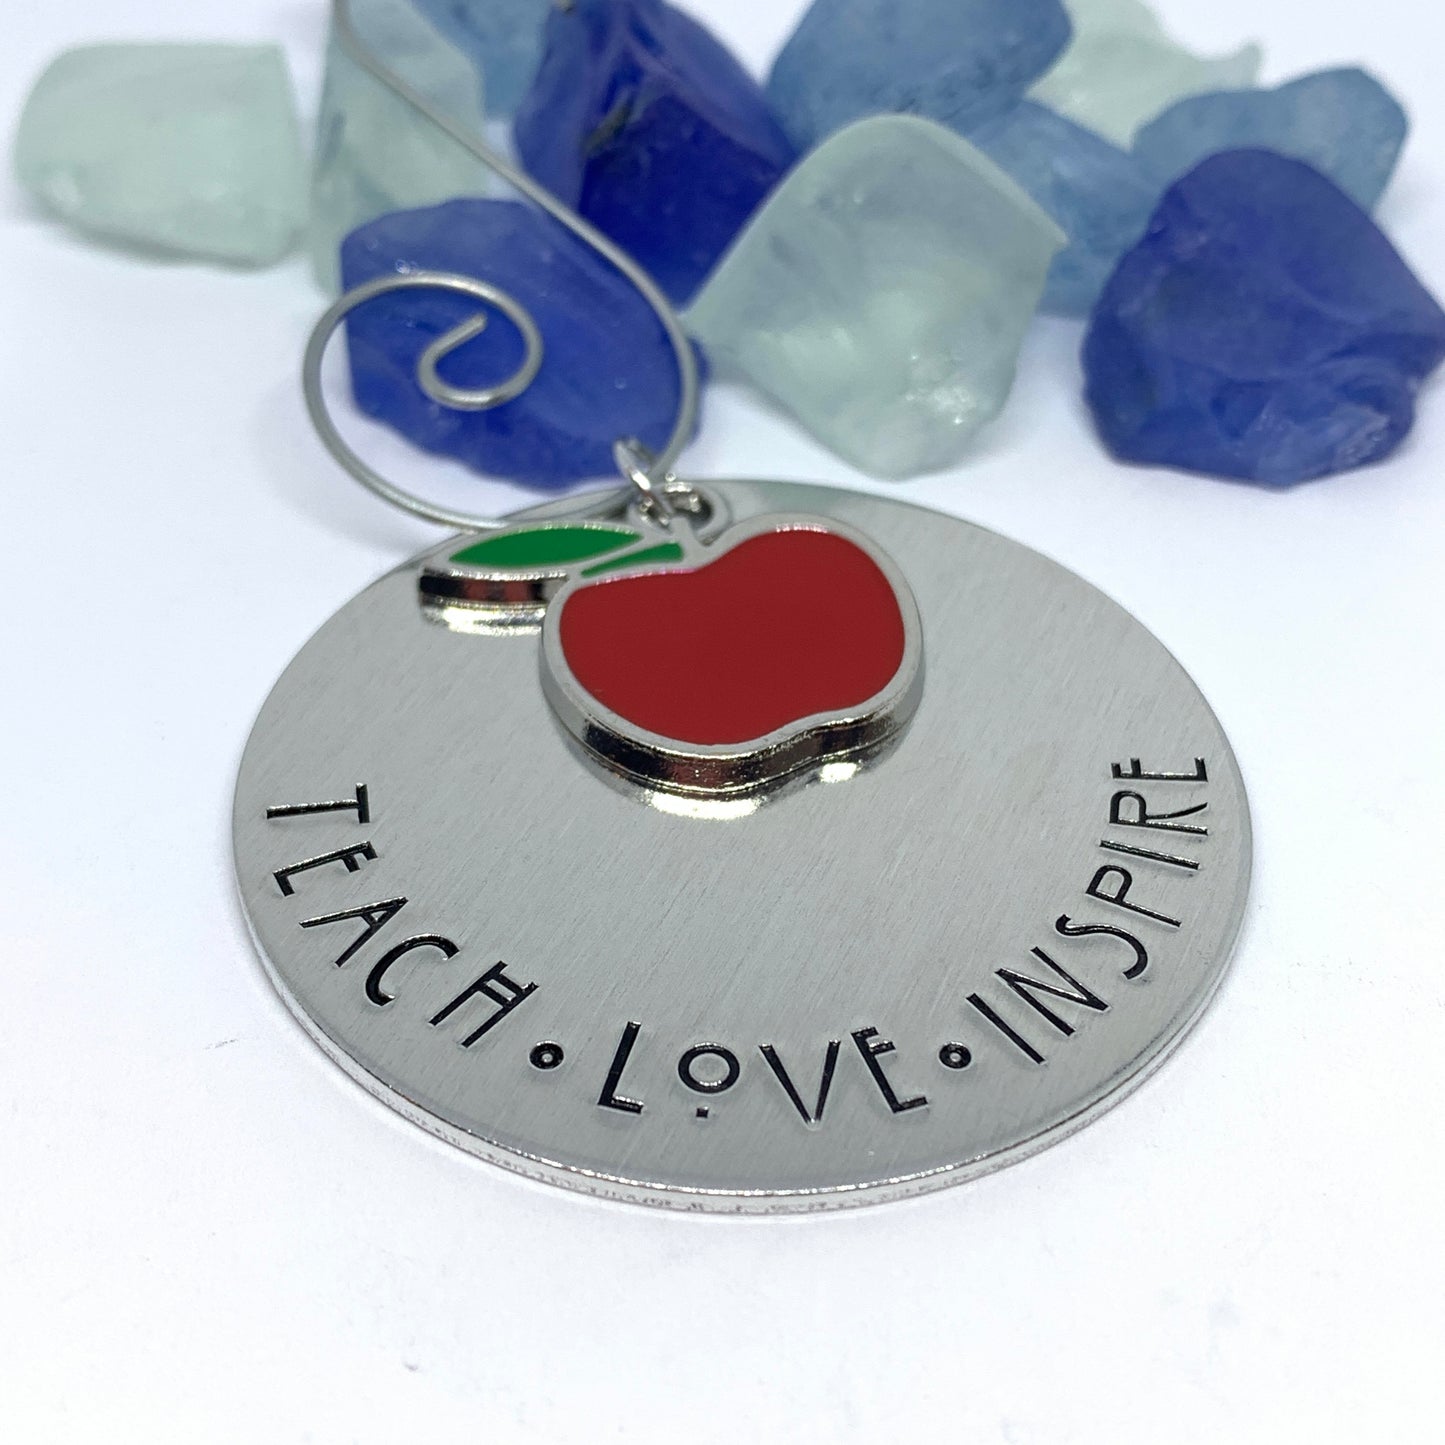 Teach Love Inspire Hand Stamped Ornament | Educator Ornament | Red Apple Charm | Holiday Ornament | Teacher Appreciation Week